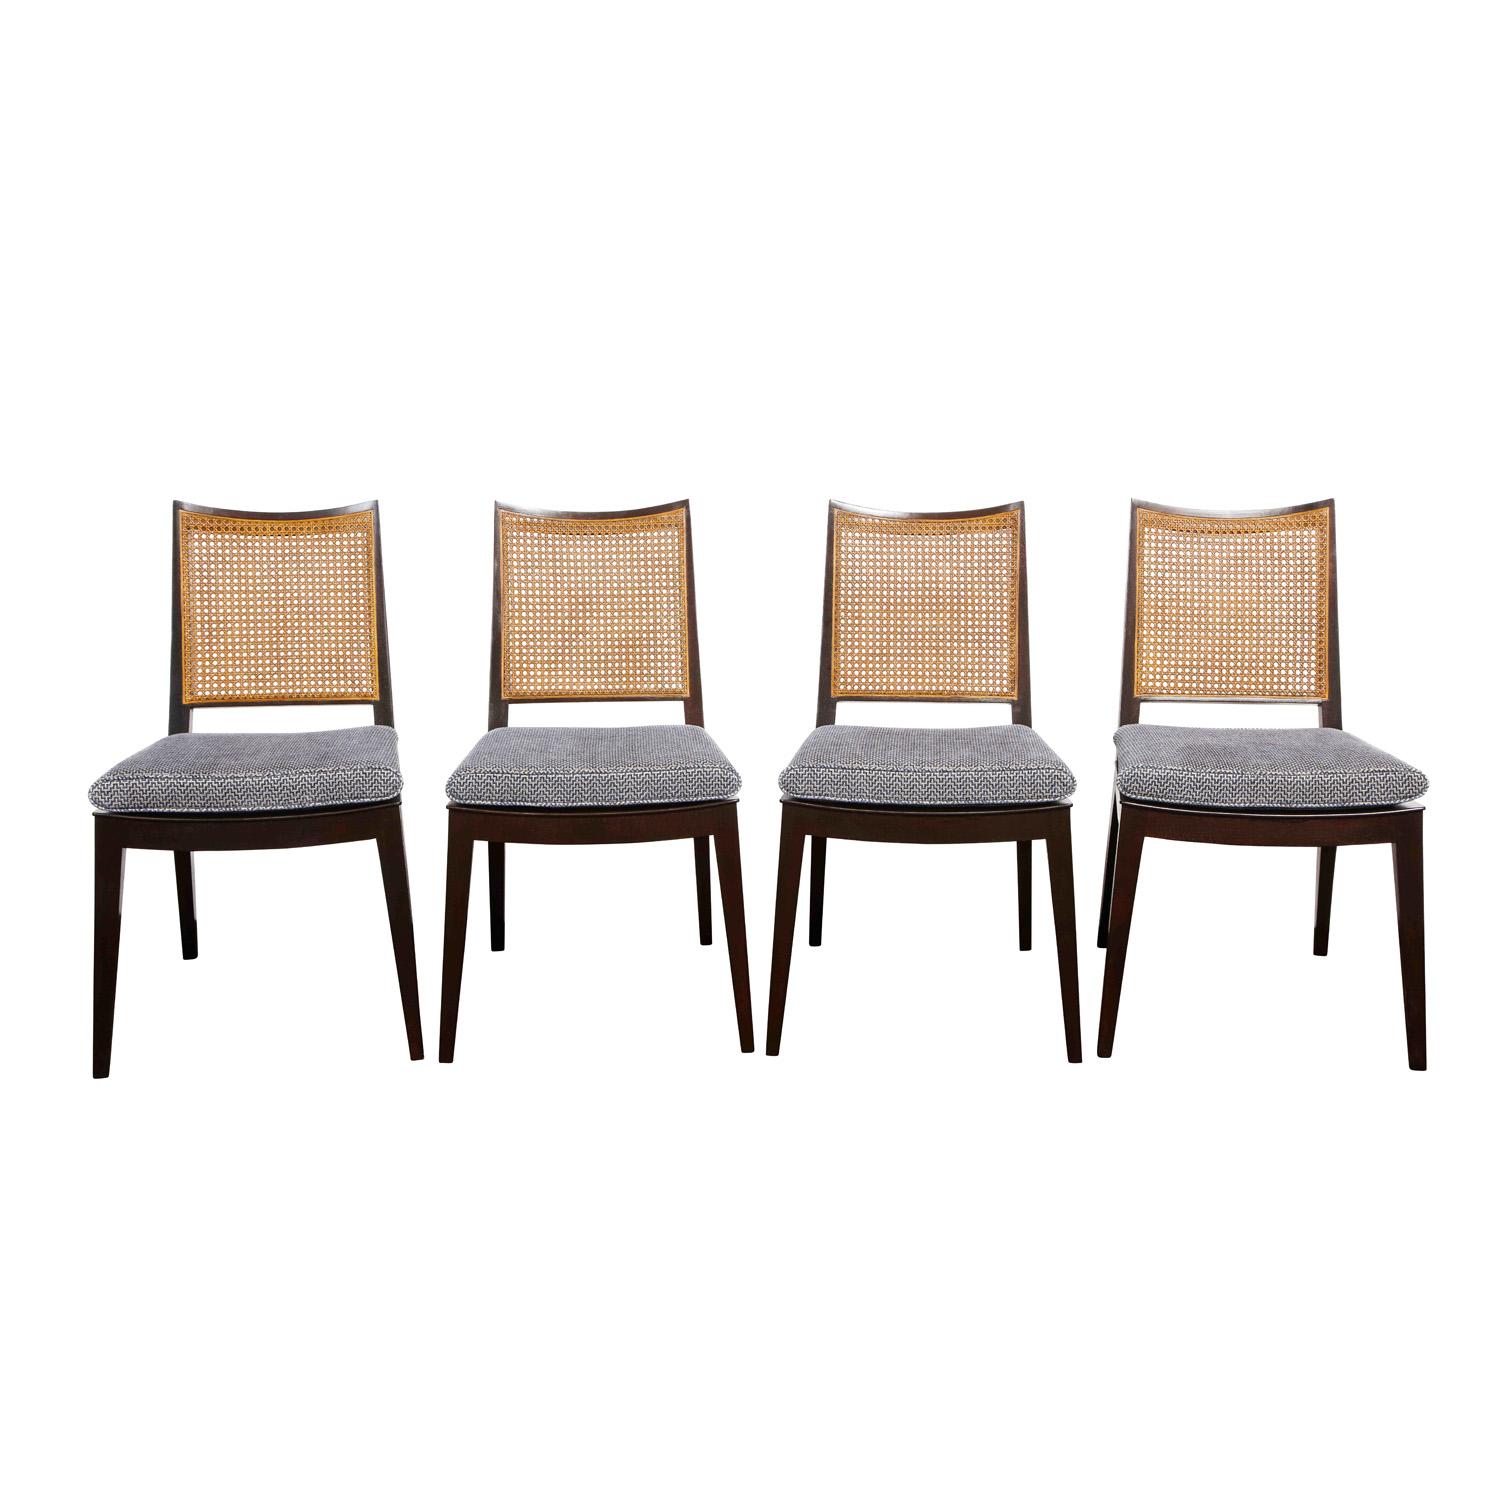 Set of 4 dining/game chairs model 6333 in mahogany with trapezoidal cane backs and newly upholstered seats by Edward Wormley for Dunbar, American 1963. (original Dunbar labels on bottom). These Classic Dunbar chairs are very chic. We have